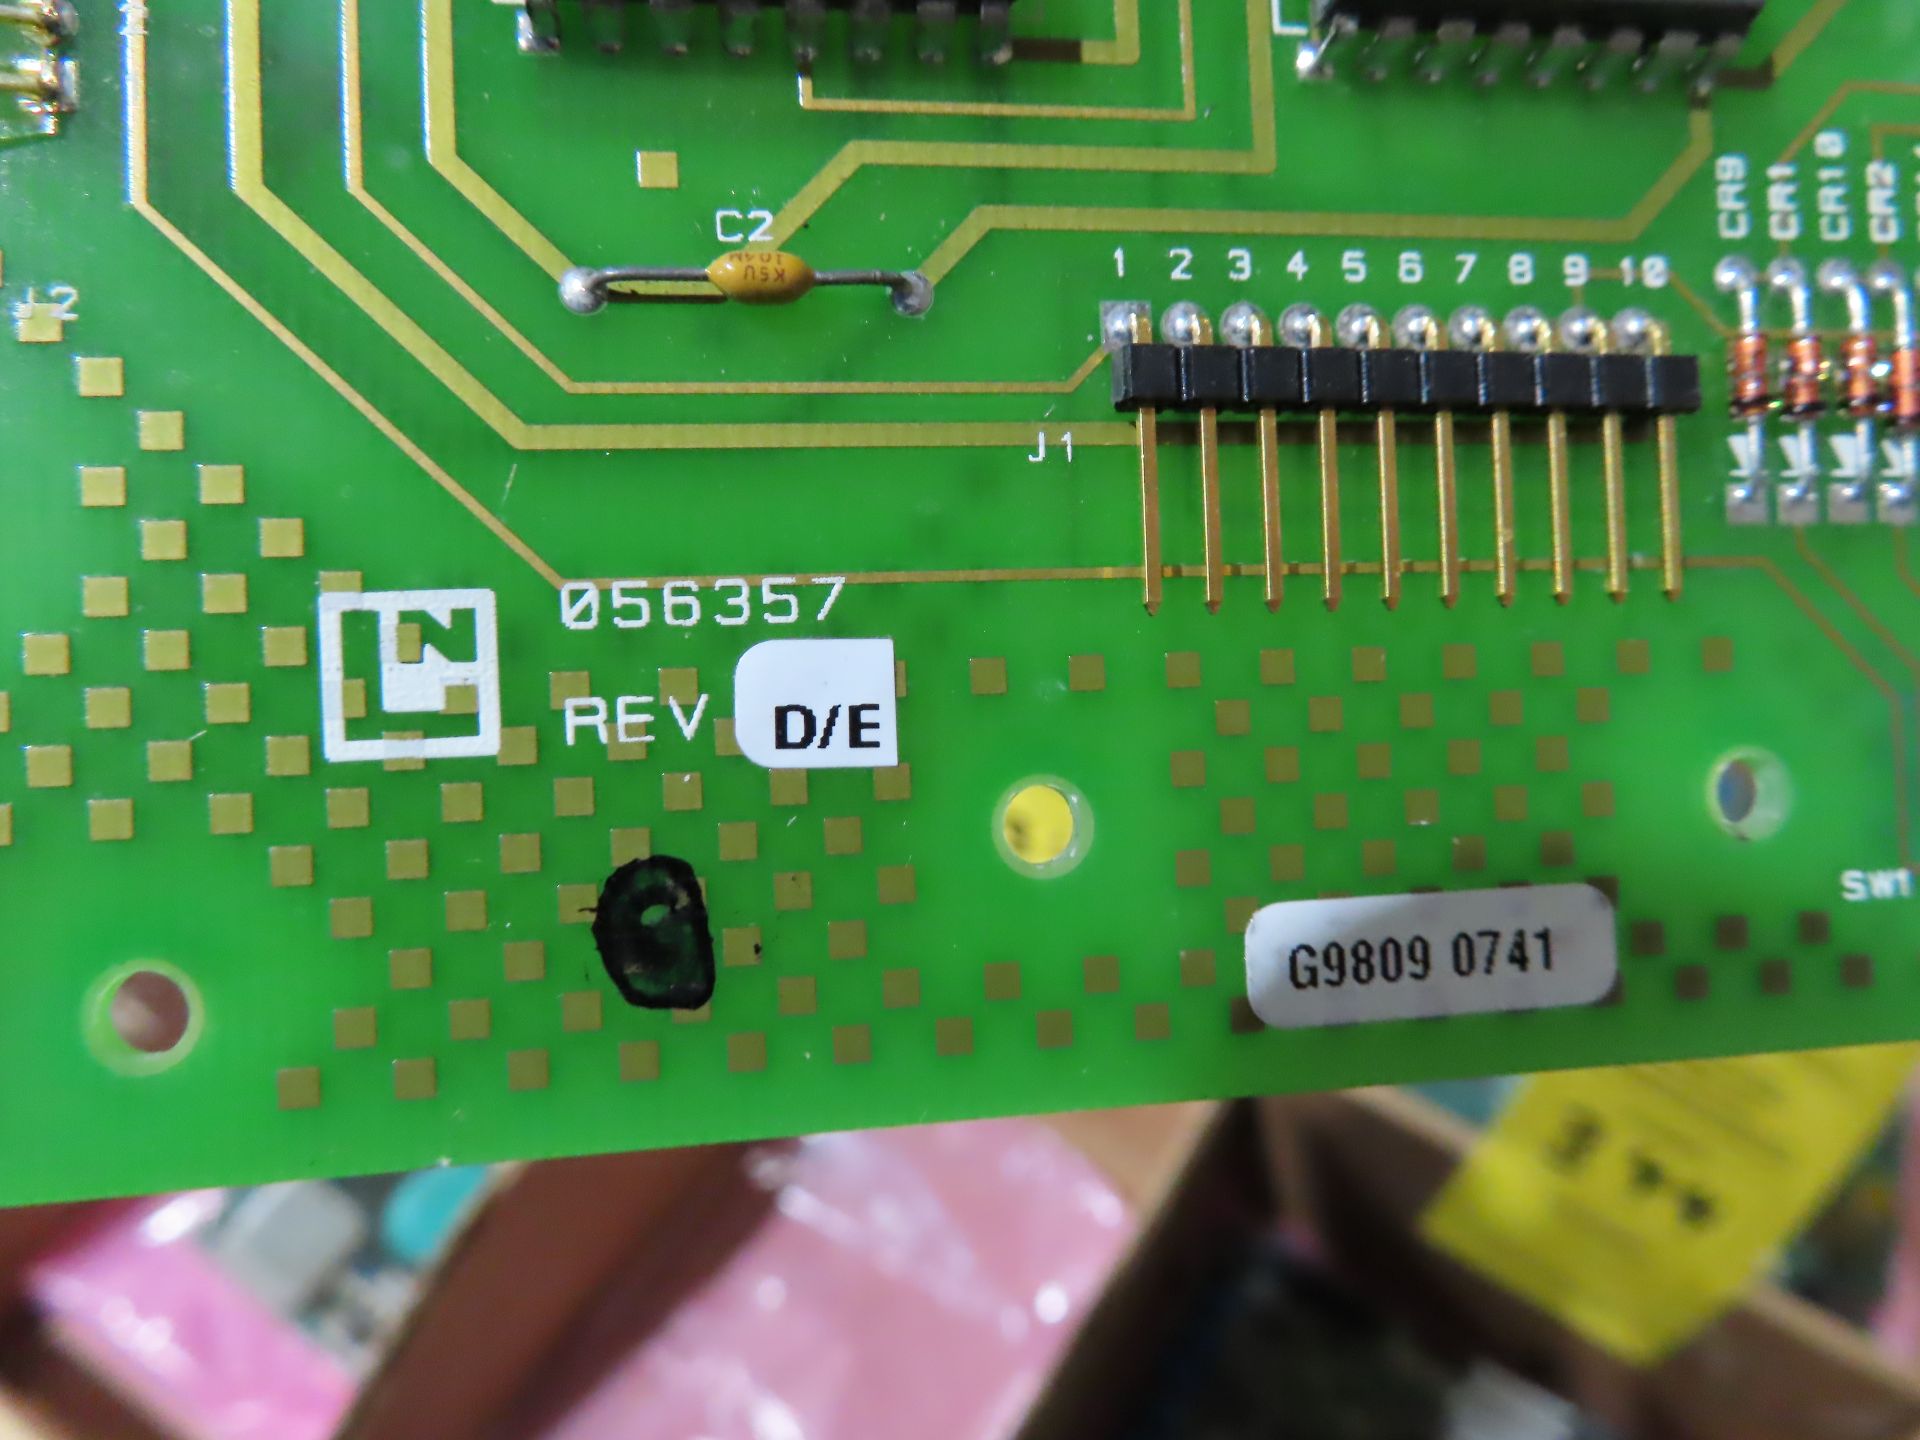 Leeds and Northrup cat 056357 lcd board, as always, with Brolyn LLC auctions, all lots can be picked - Image 2 of 2